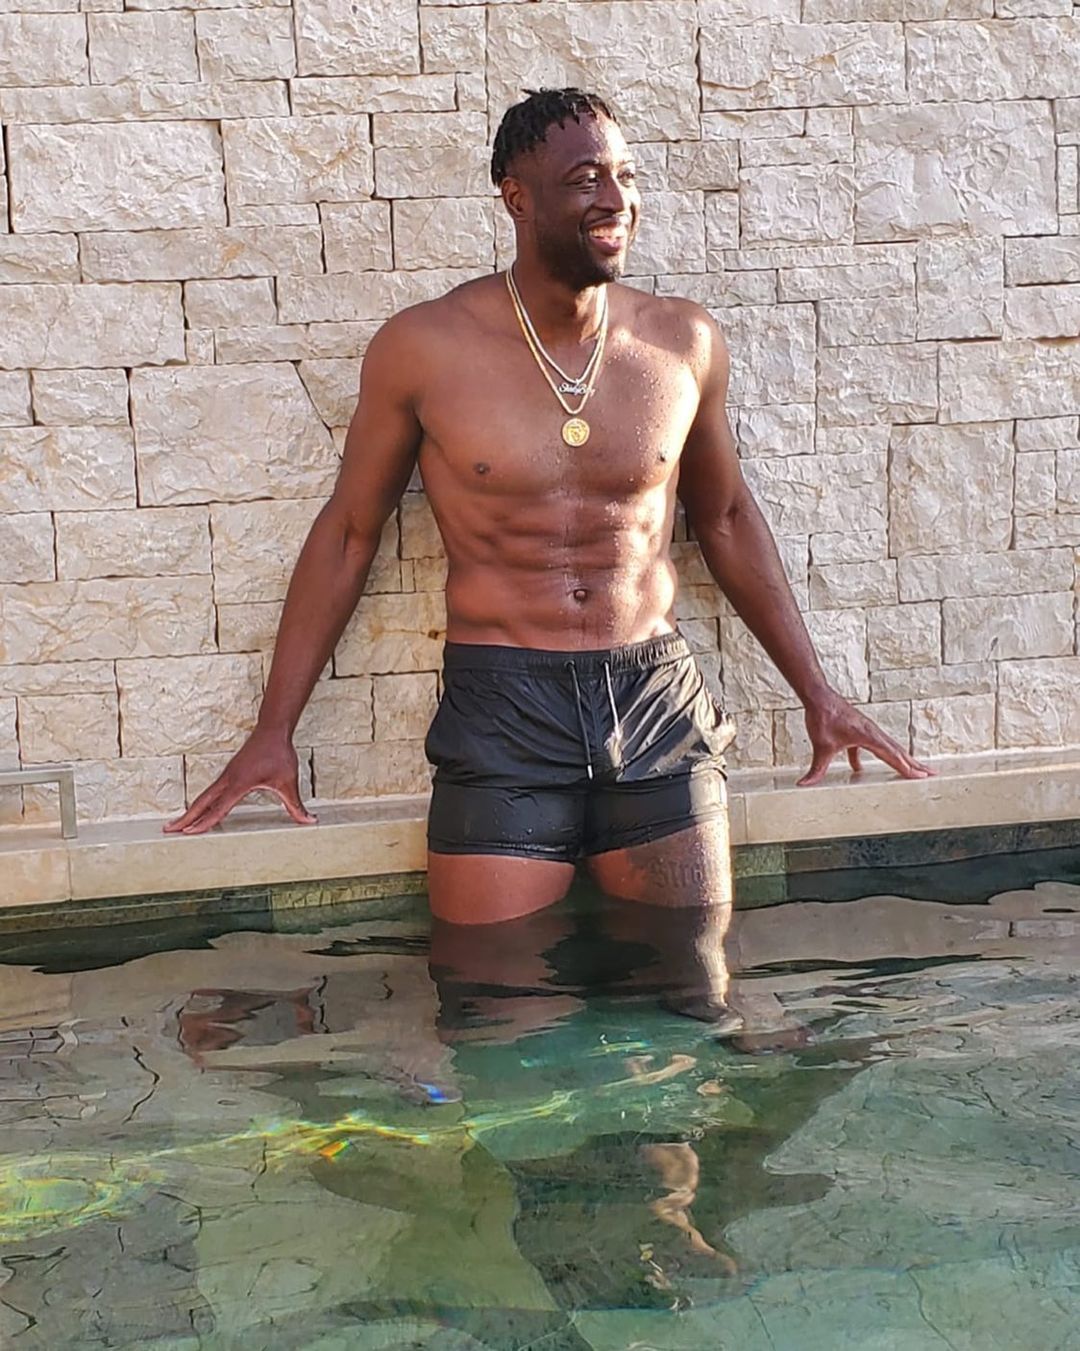 Nba Star Dwyane Wade Shares A Fully Nude Photo Of Himself